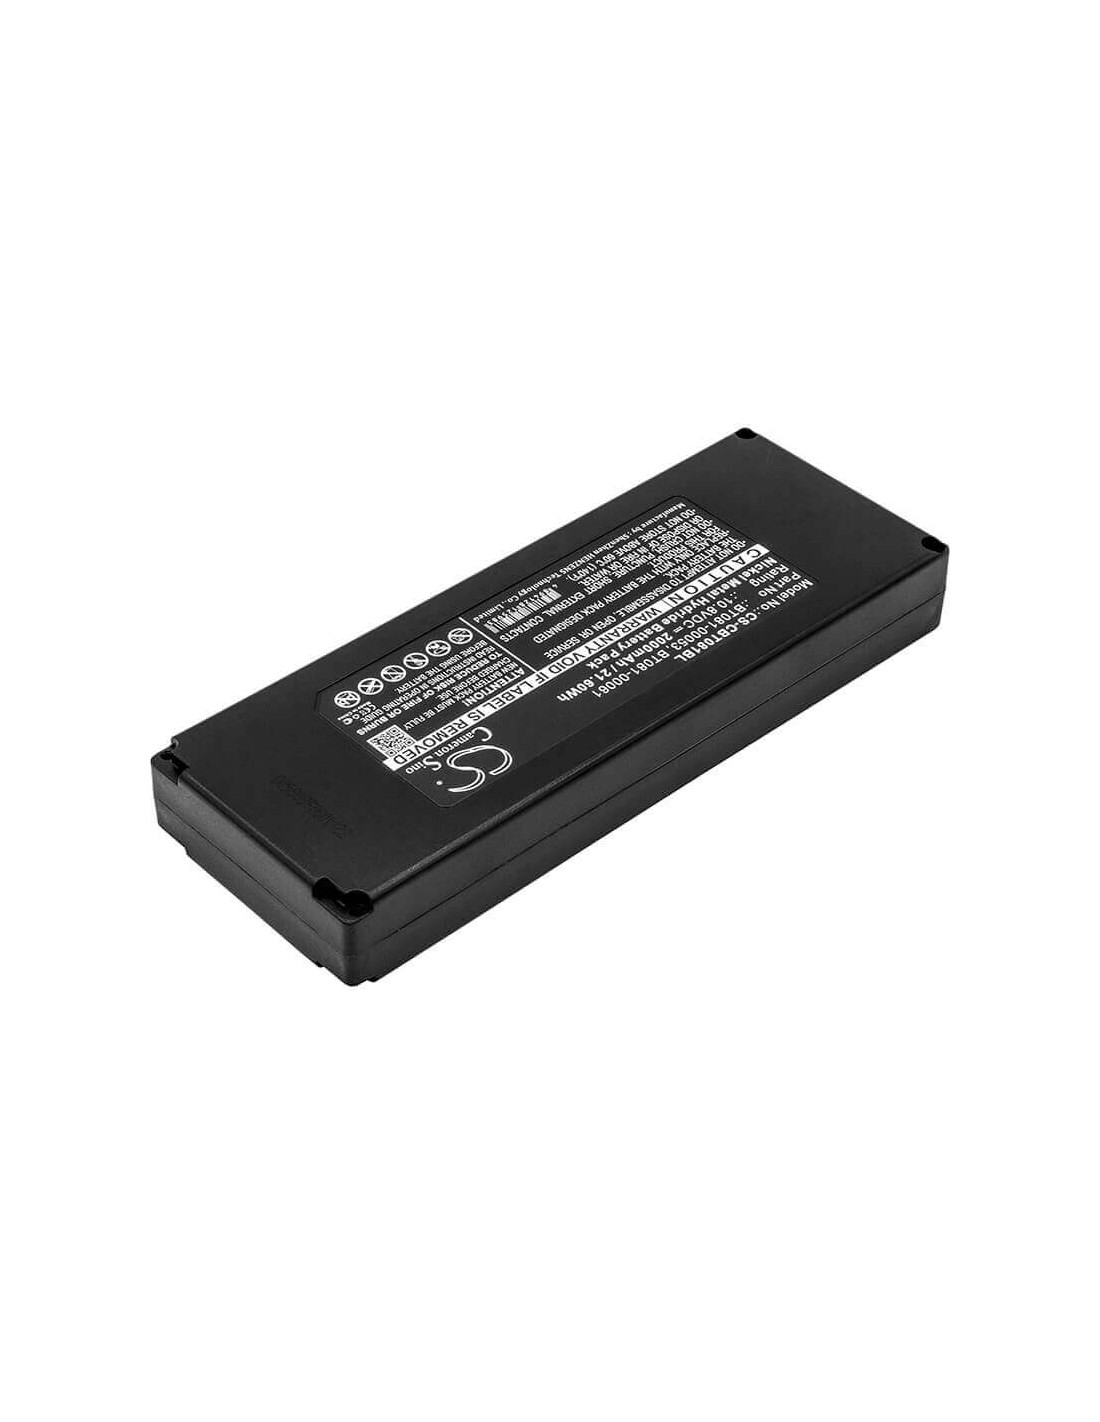 Battery for Cattron Theimeg Th- Ec/lo 10.8V, 2000mAh - 21.60Wh